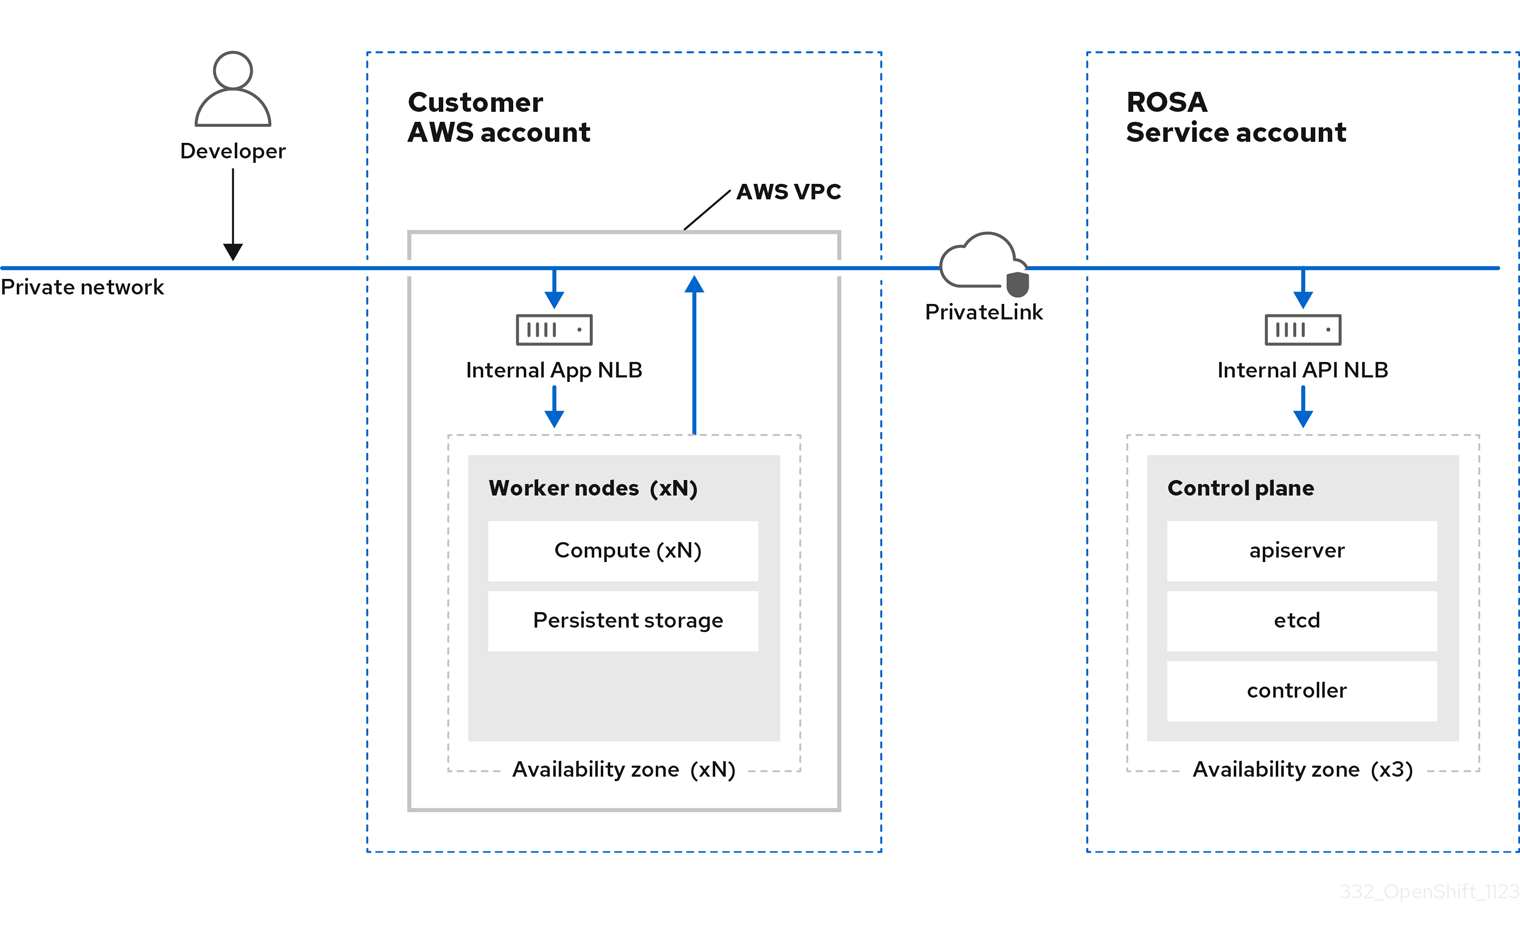 ROSA with HCP deployed on a private network